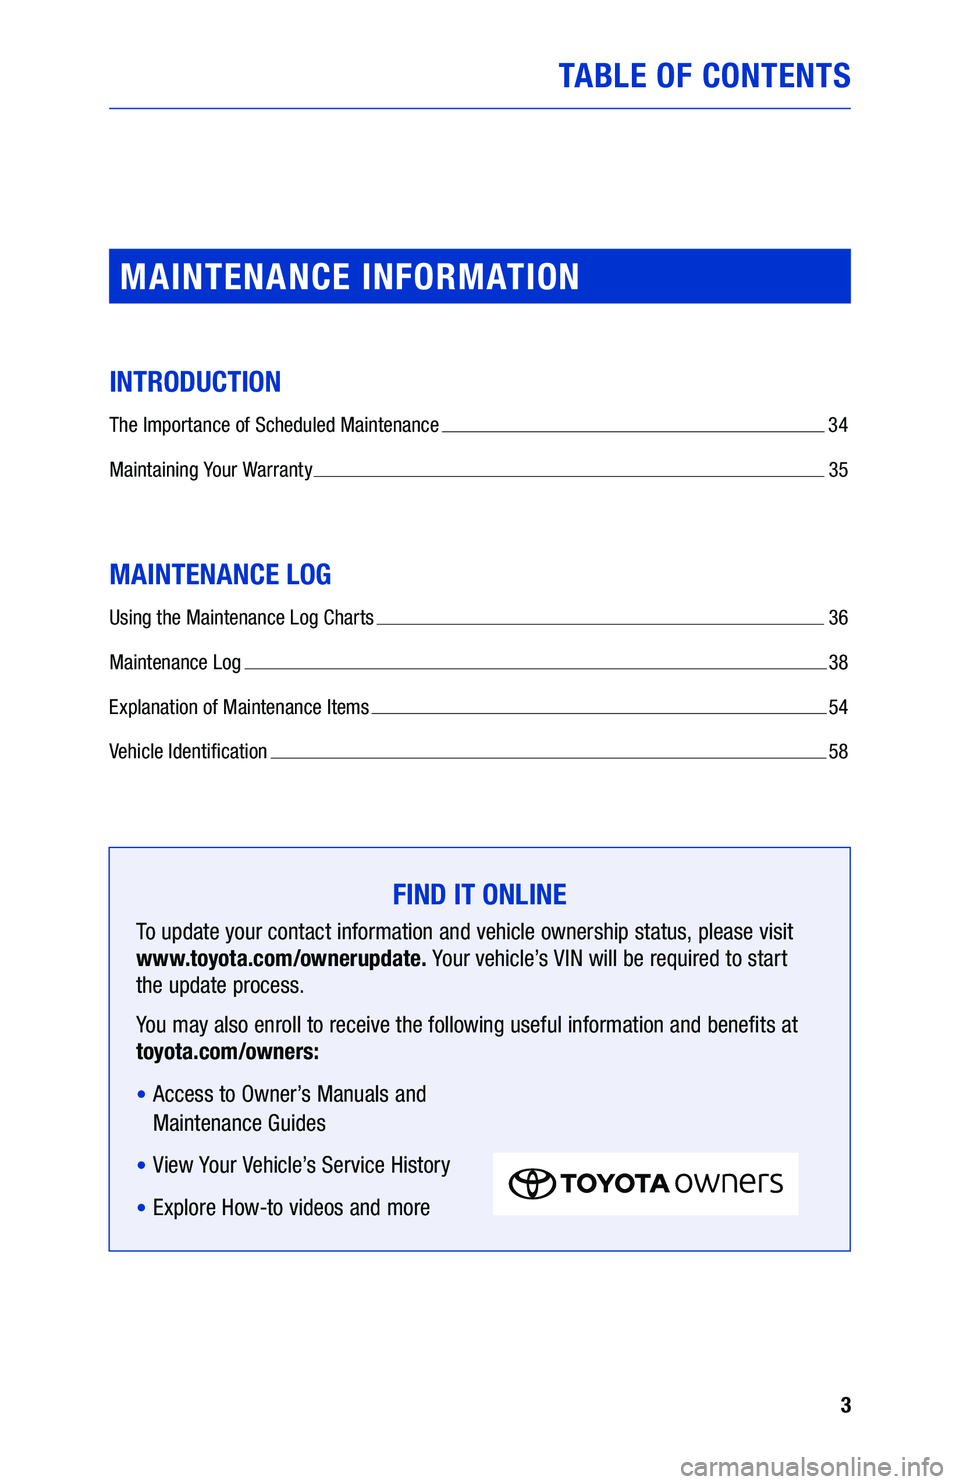 TOYOTA PRIUS C 2019  Warranties & Maintenance Guides (in English) 3
TABLE OF CONTENTS
FIND IT ONLINE
To update your contact information and vehicle ownership status, please visit  
www.toyota.com/ownerupdate. Your vehicle’s VIN will be required to start   
the upd